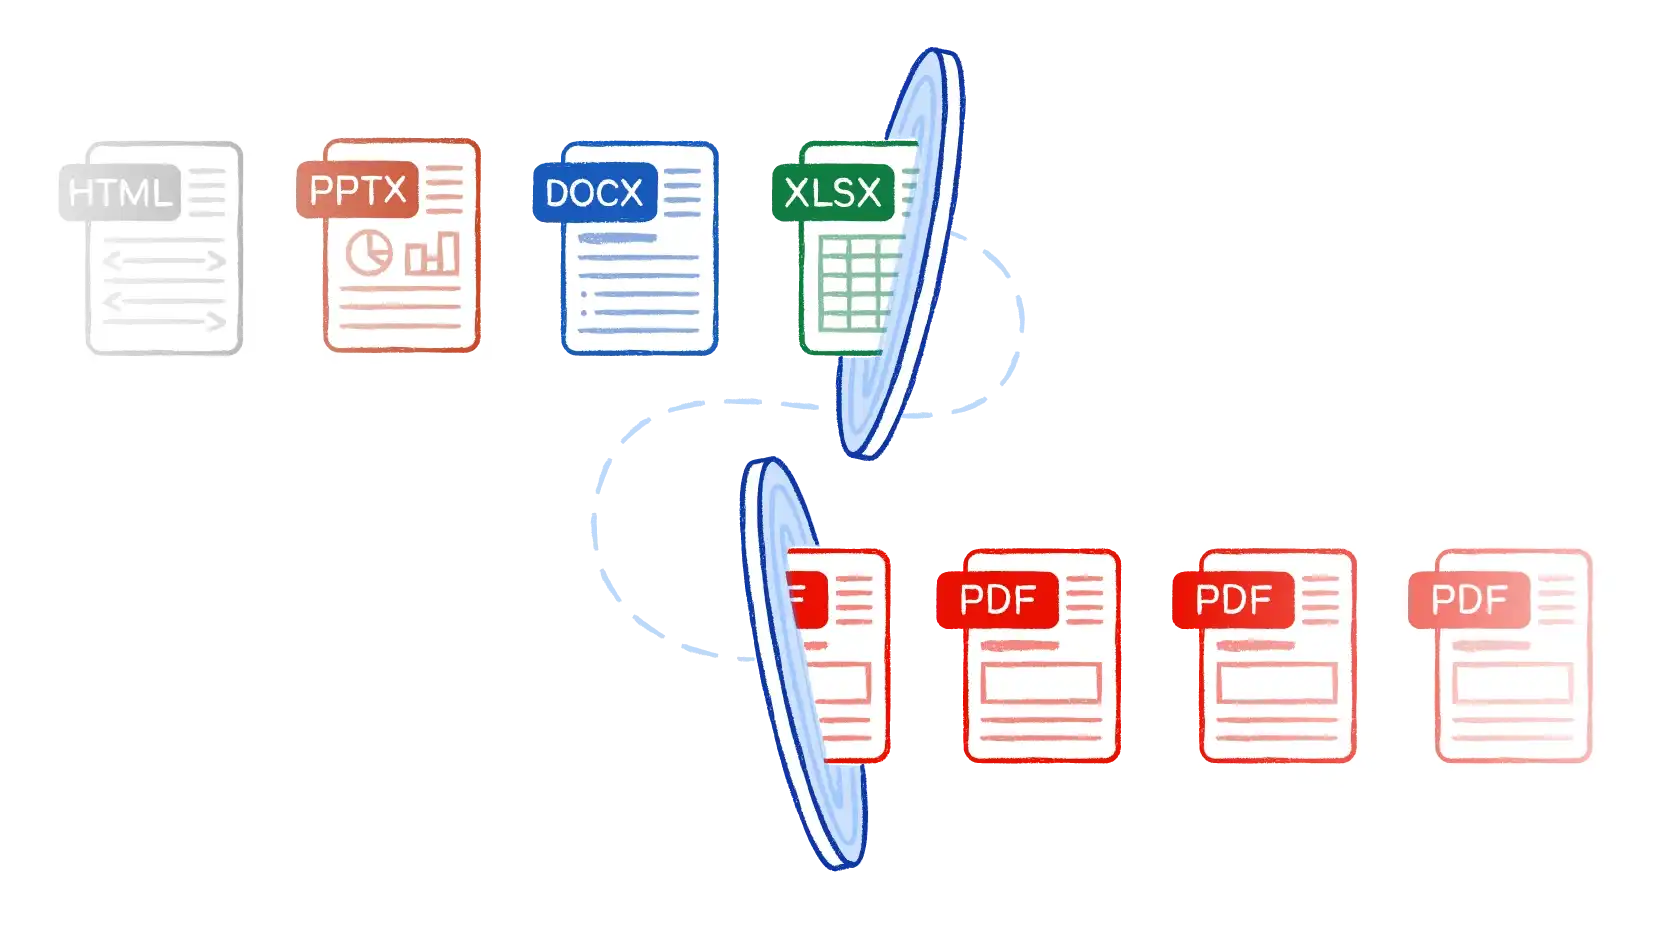 Convert documents to PDF using Power Automate